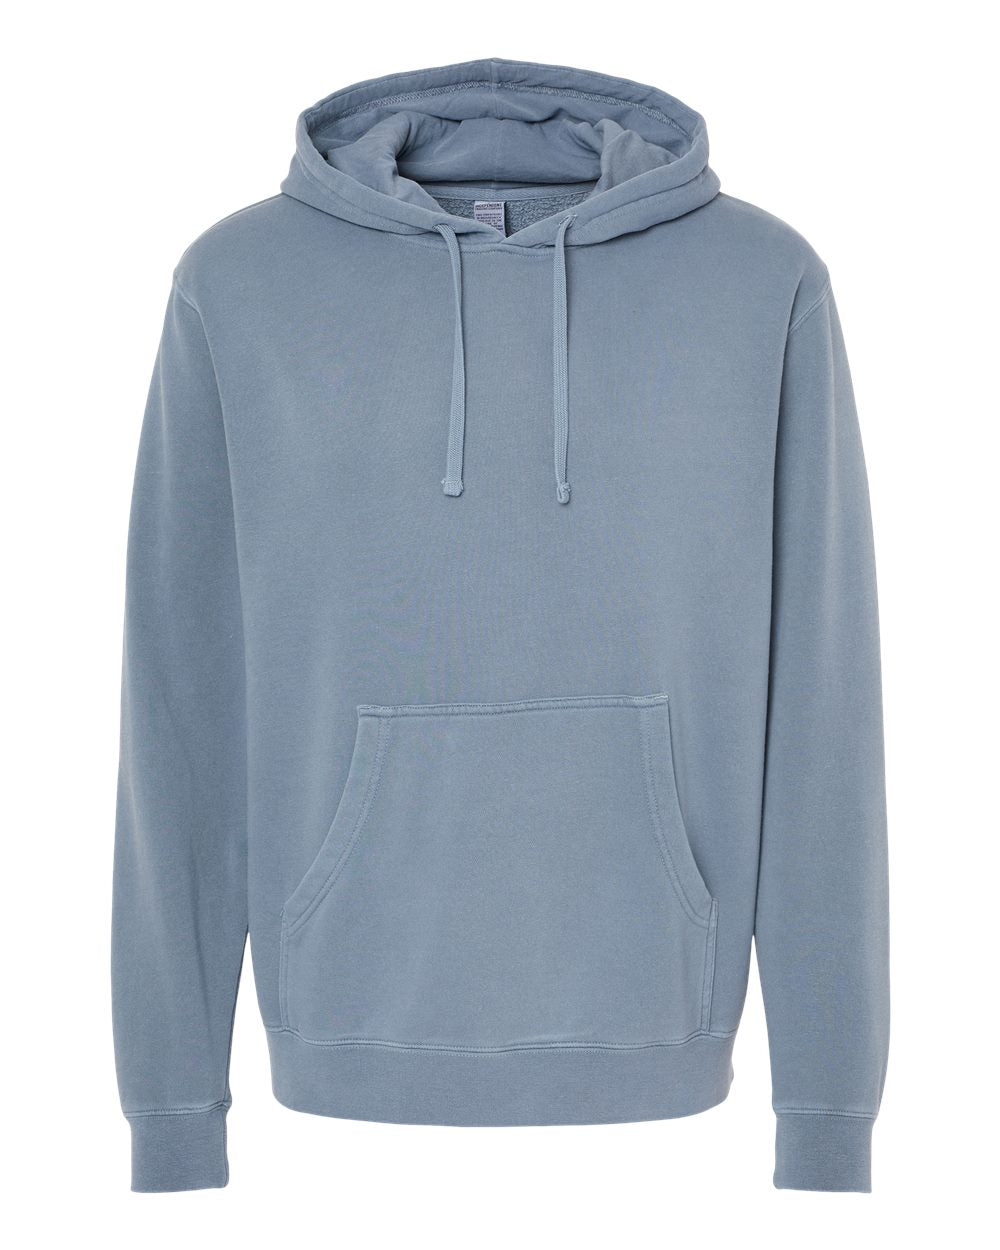 Independent Pigment-Dyed Hoodie (PRM4500) in Pigment Slate Blue